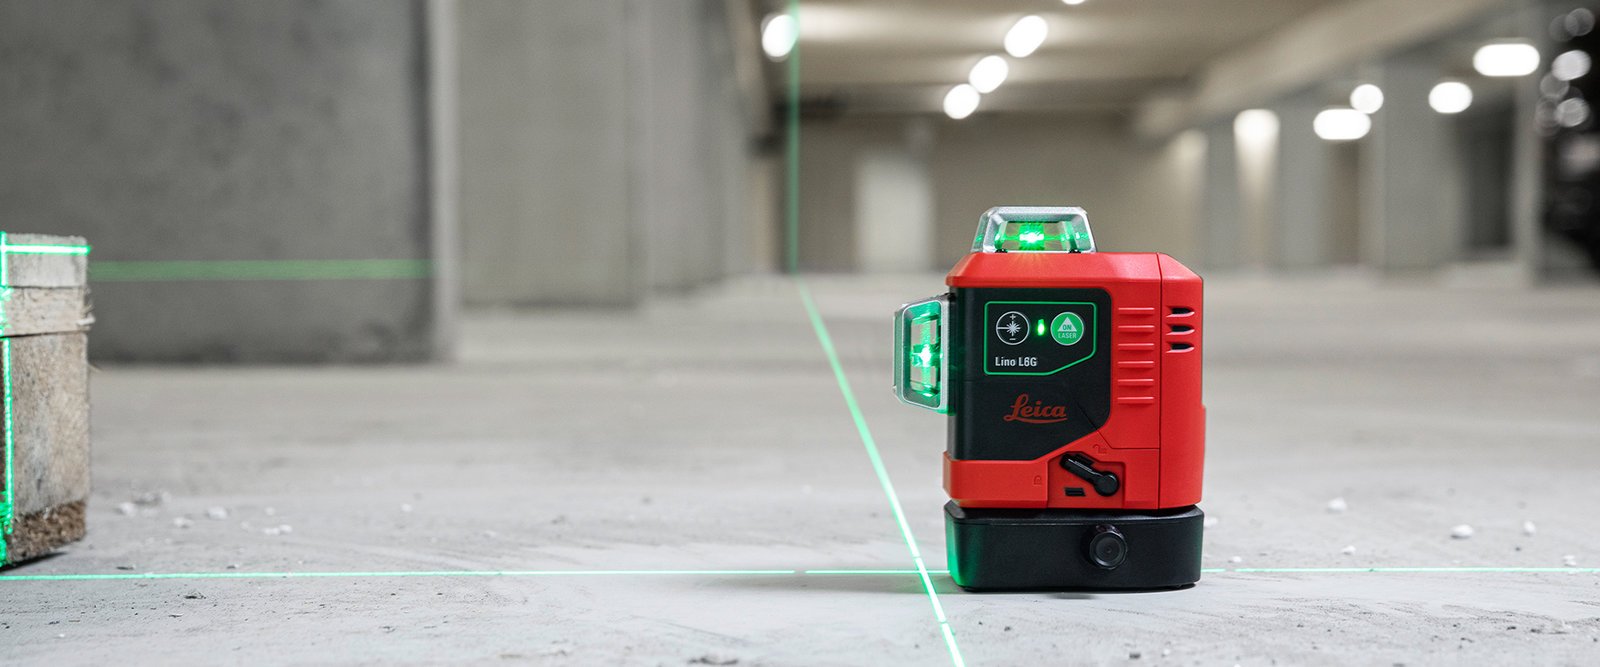 Leica Lino L6G multi-line laser with 3x360° laser lines